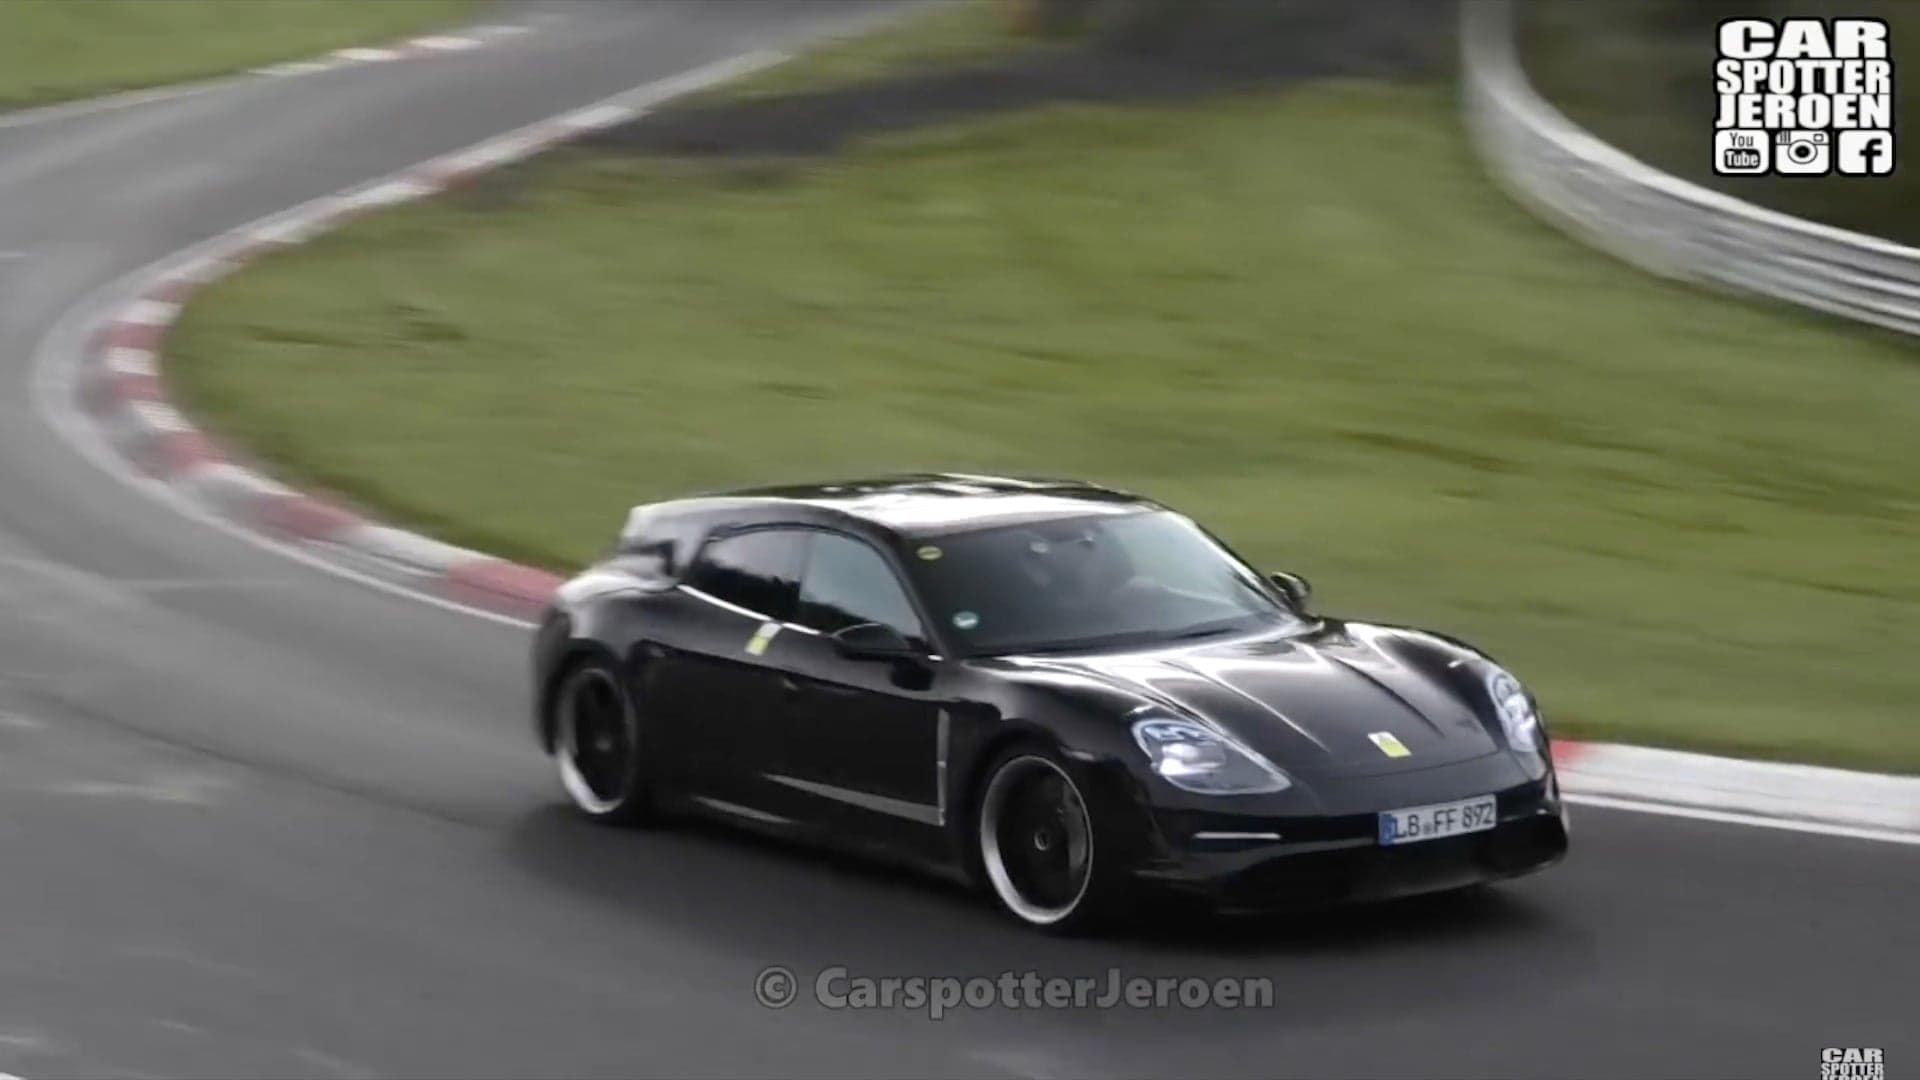 Porsche Taycan Cross Turismo Wagon Prototype Spotted Lapping the Nurburgring